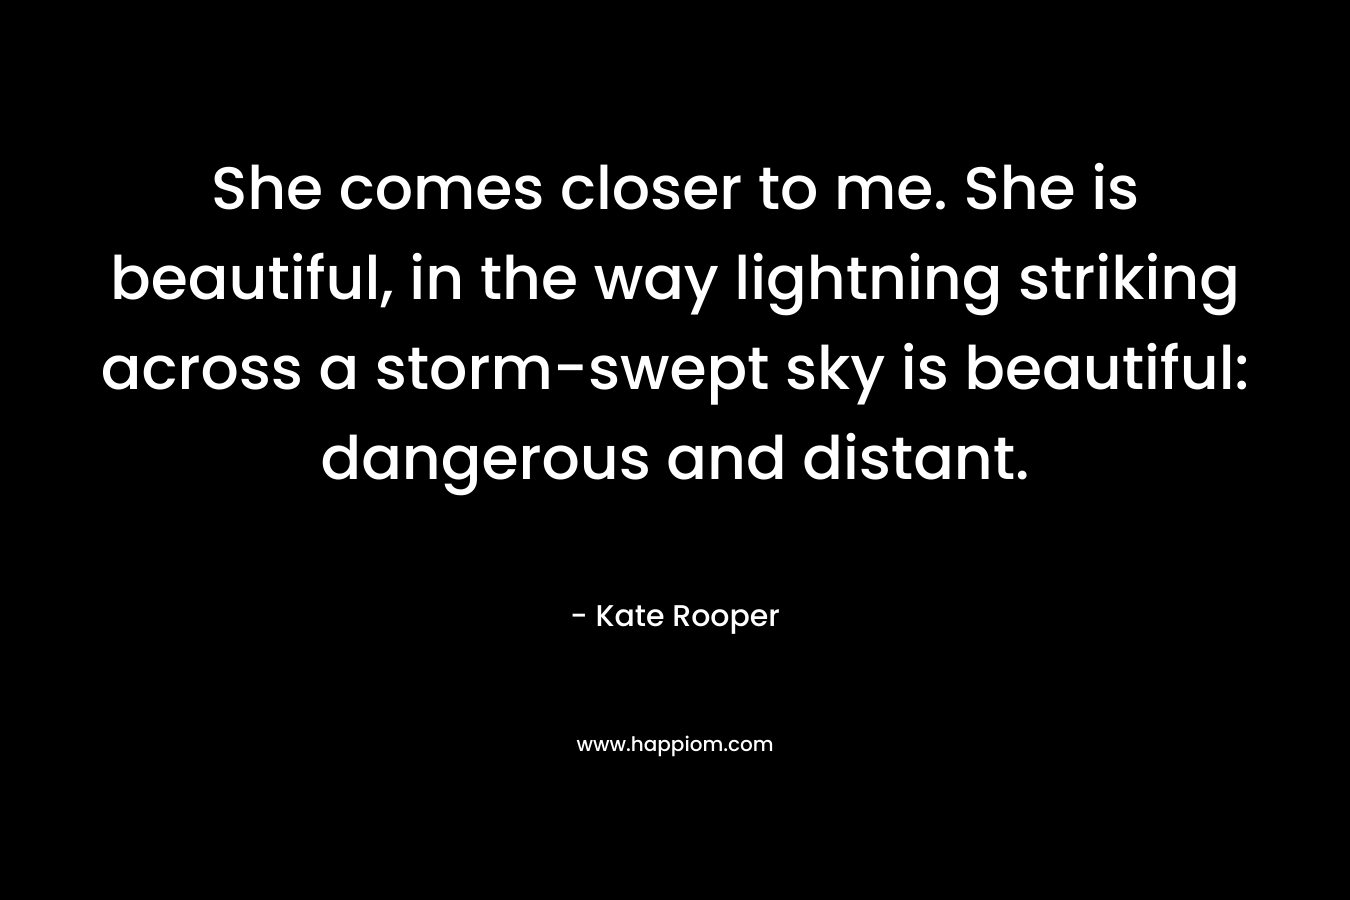 She comes closer to me. She is beautiful, in the way lightning striking across a storm-swept sky is beautiful: dangerous and distant.